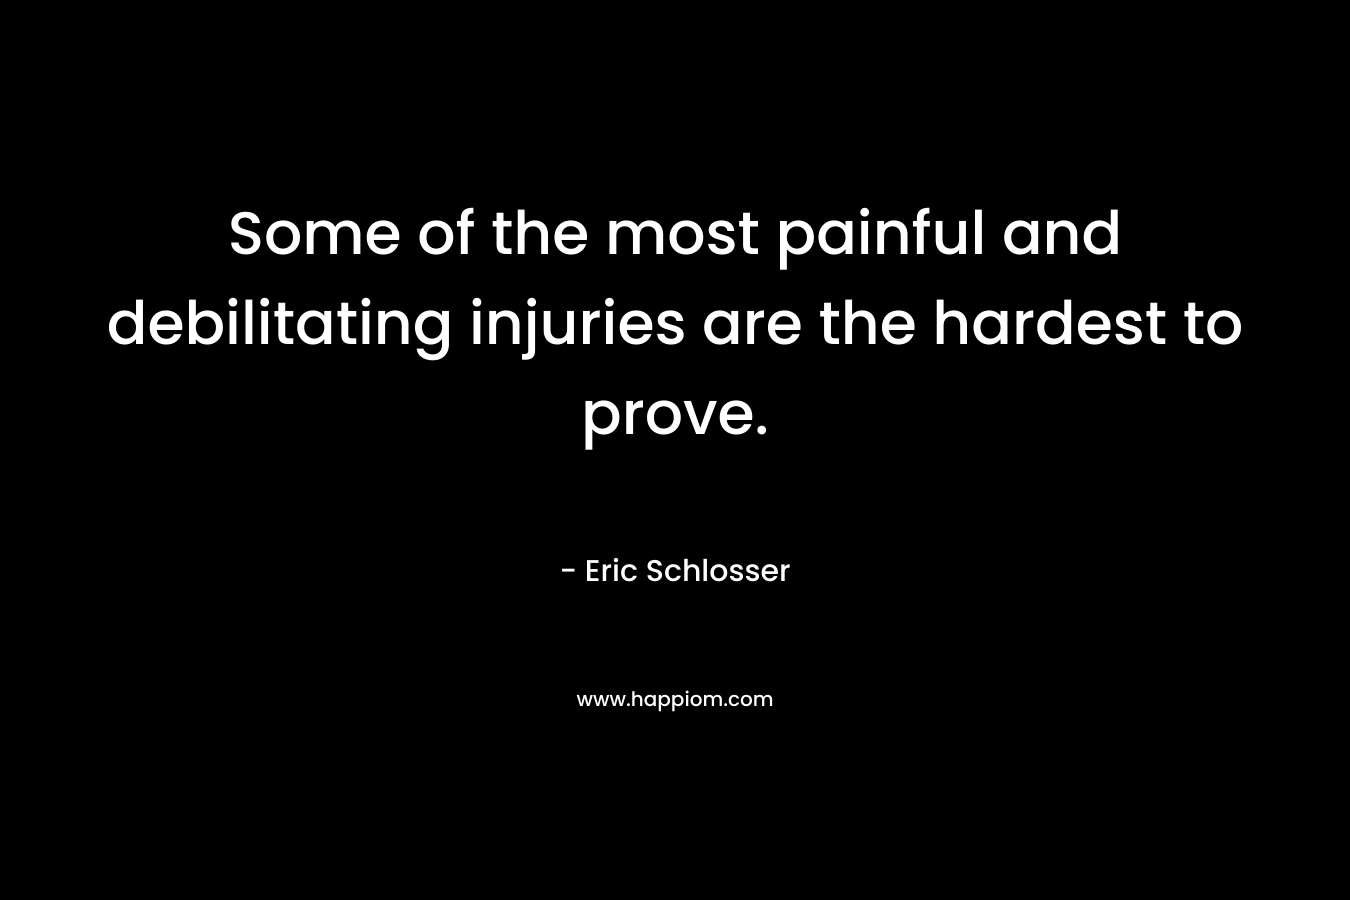 Some of the most painful and debilitating injuries are the hardest to prove. – Eric Schlosser